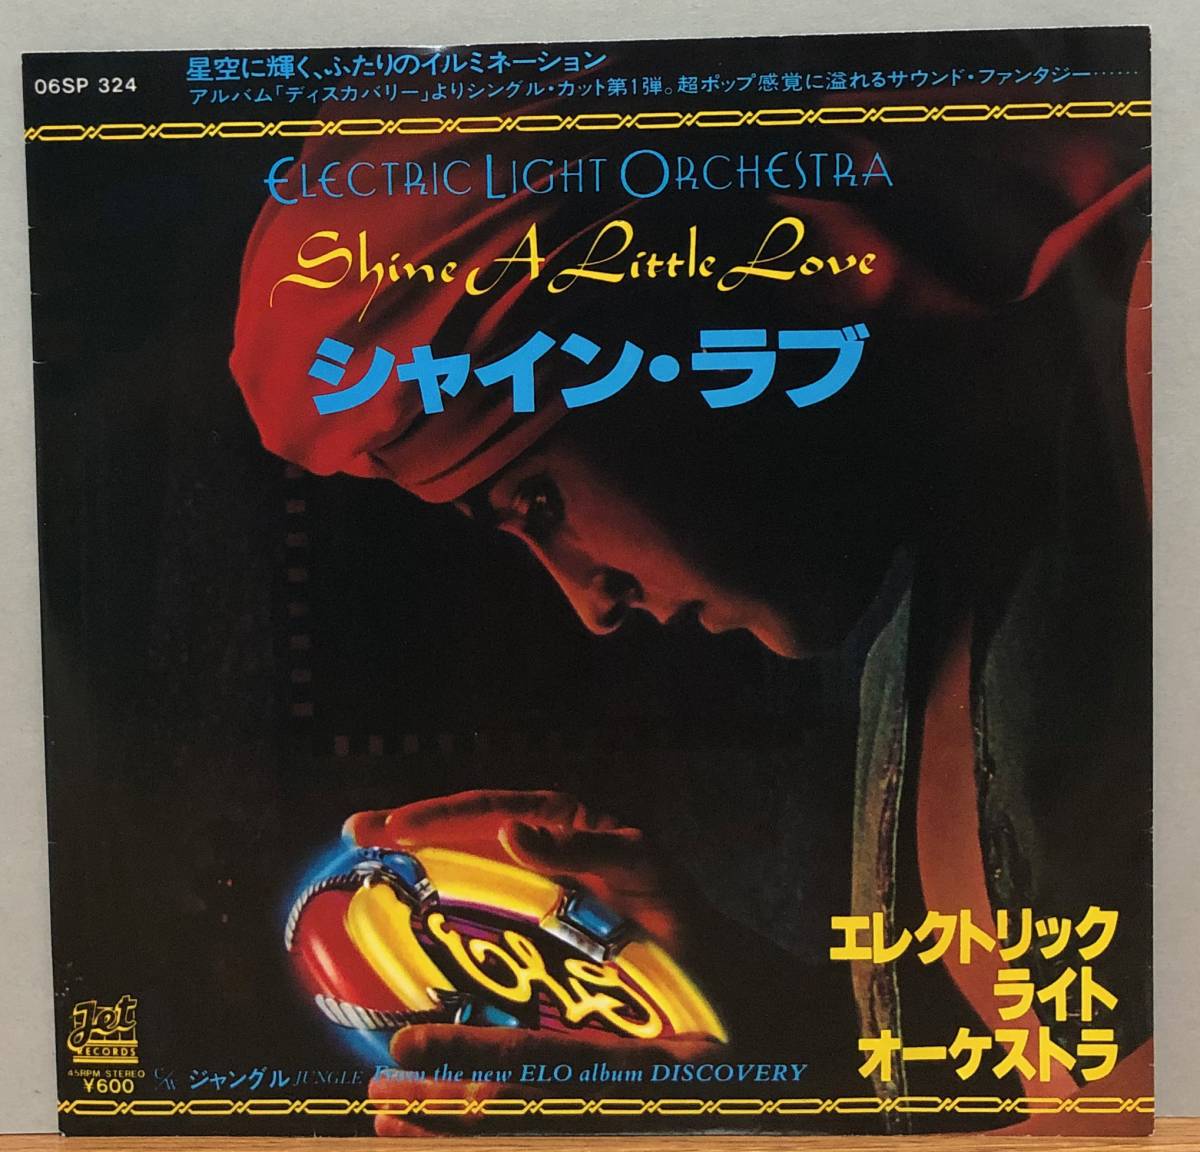 【SALE／92%OFF】 正規品 エレクトリック ライト オーケストラ Electric Light Orchestra シャイン ラブ Shine A Little Love Promo7inch importpojazdow.pl importpojazdow.pl